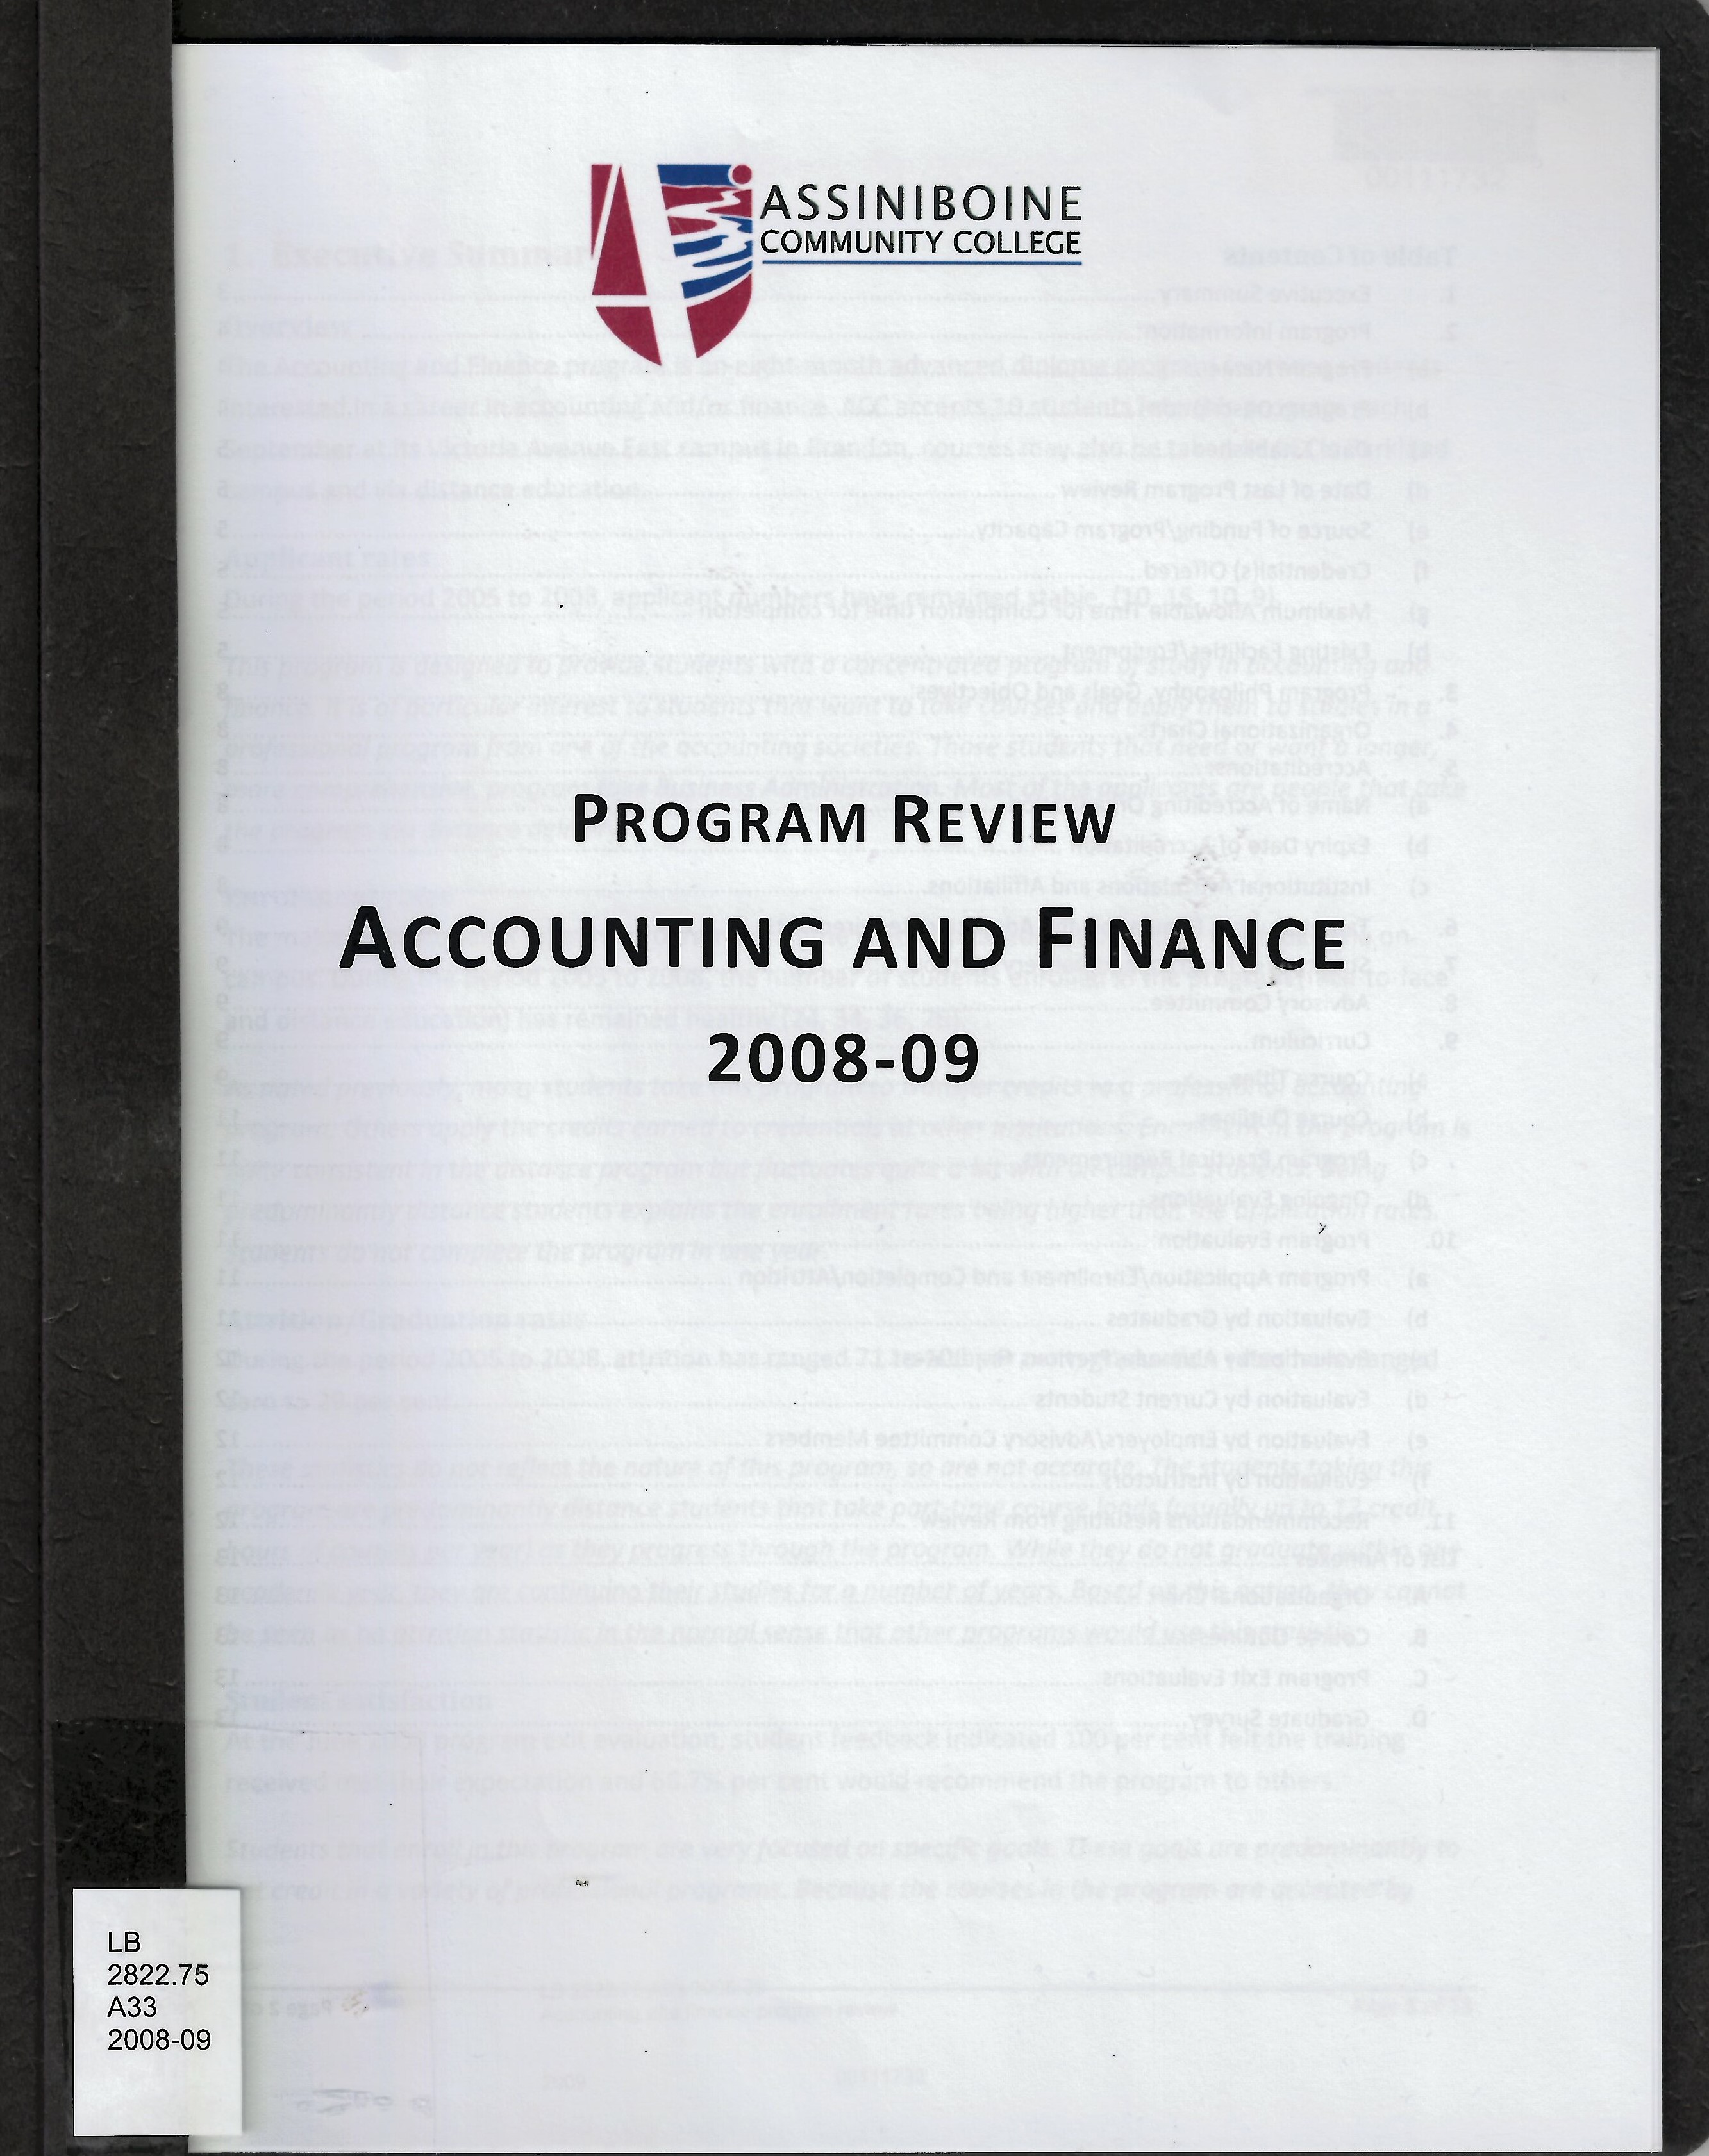 Accounting and finance program review